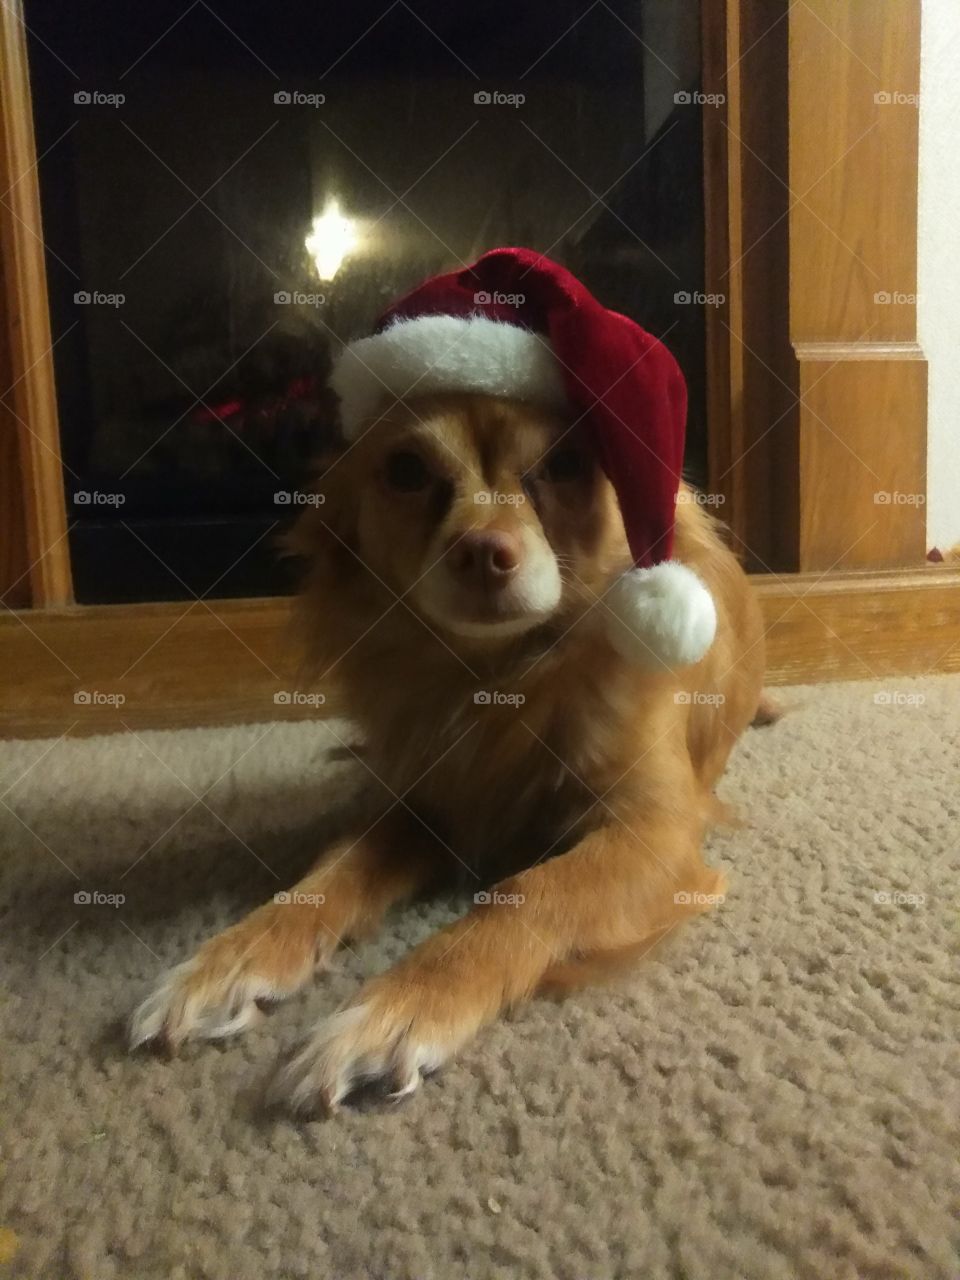 Punchie says Merry Christmas